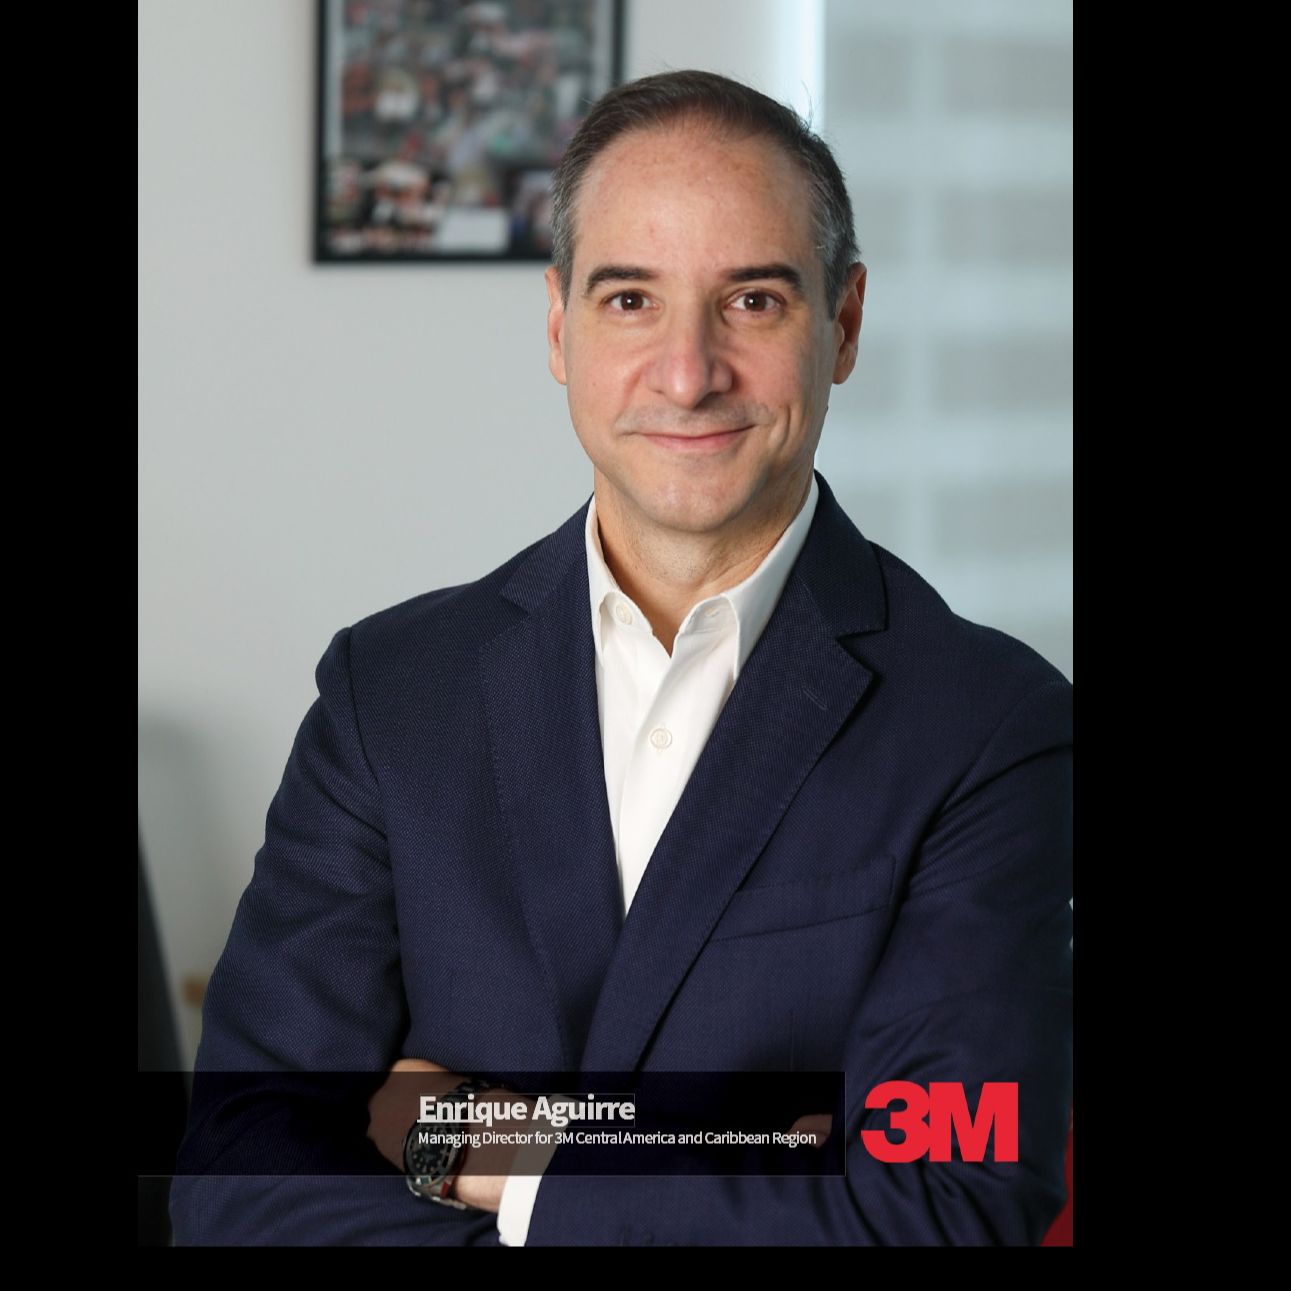 Enrique Aguirre
Managing Director for 3M Central America and Caribbean Region